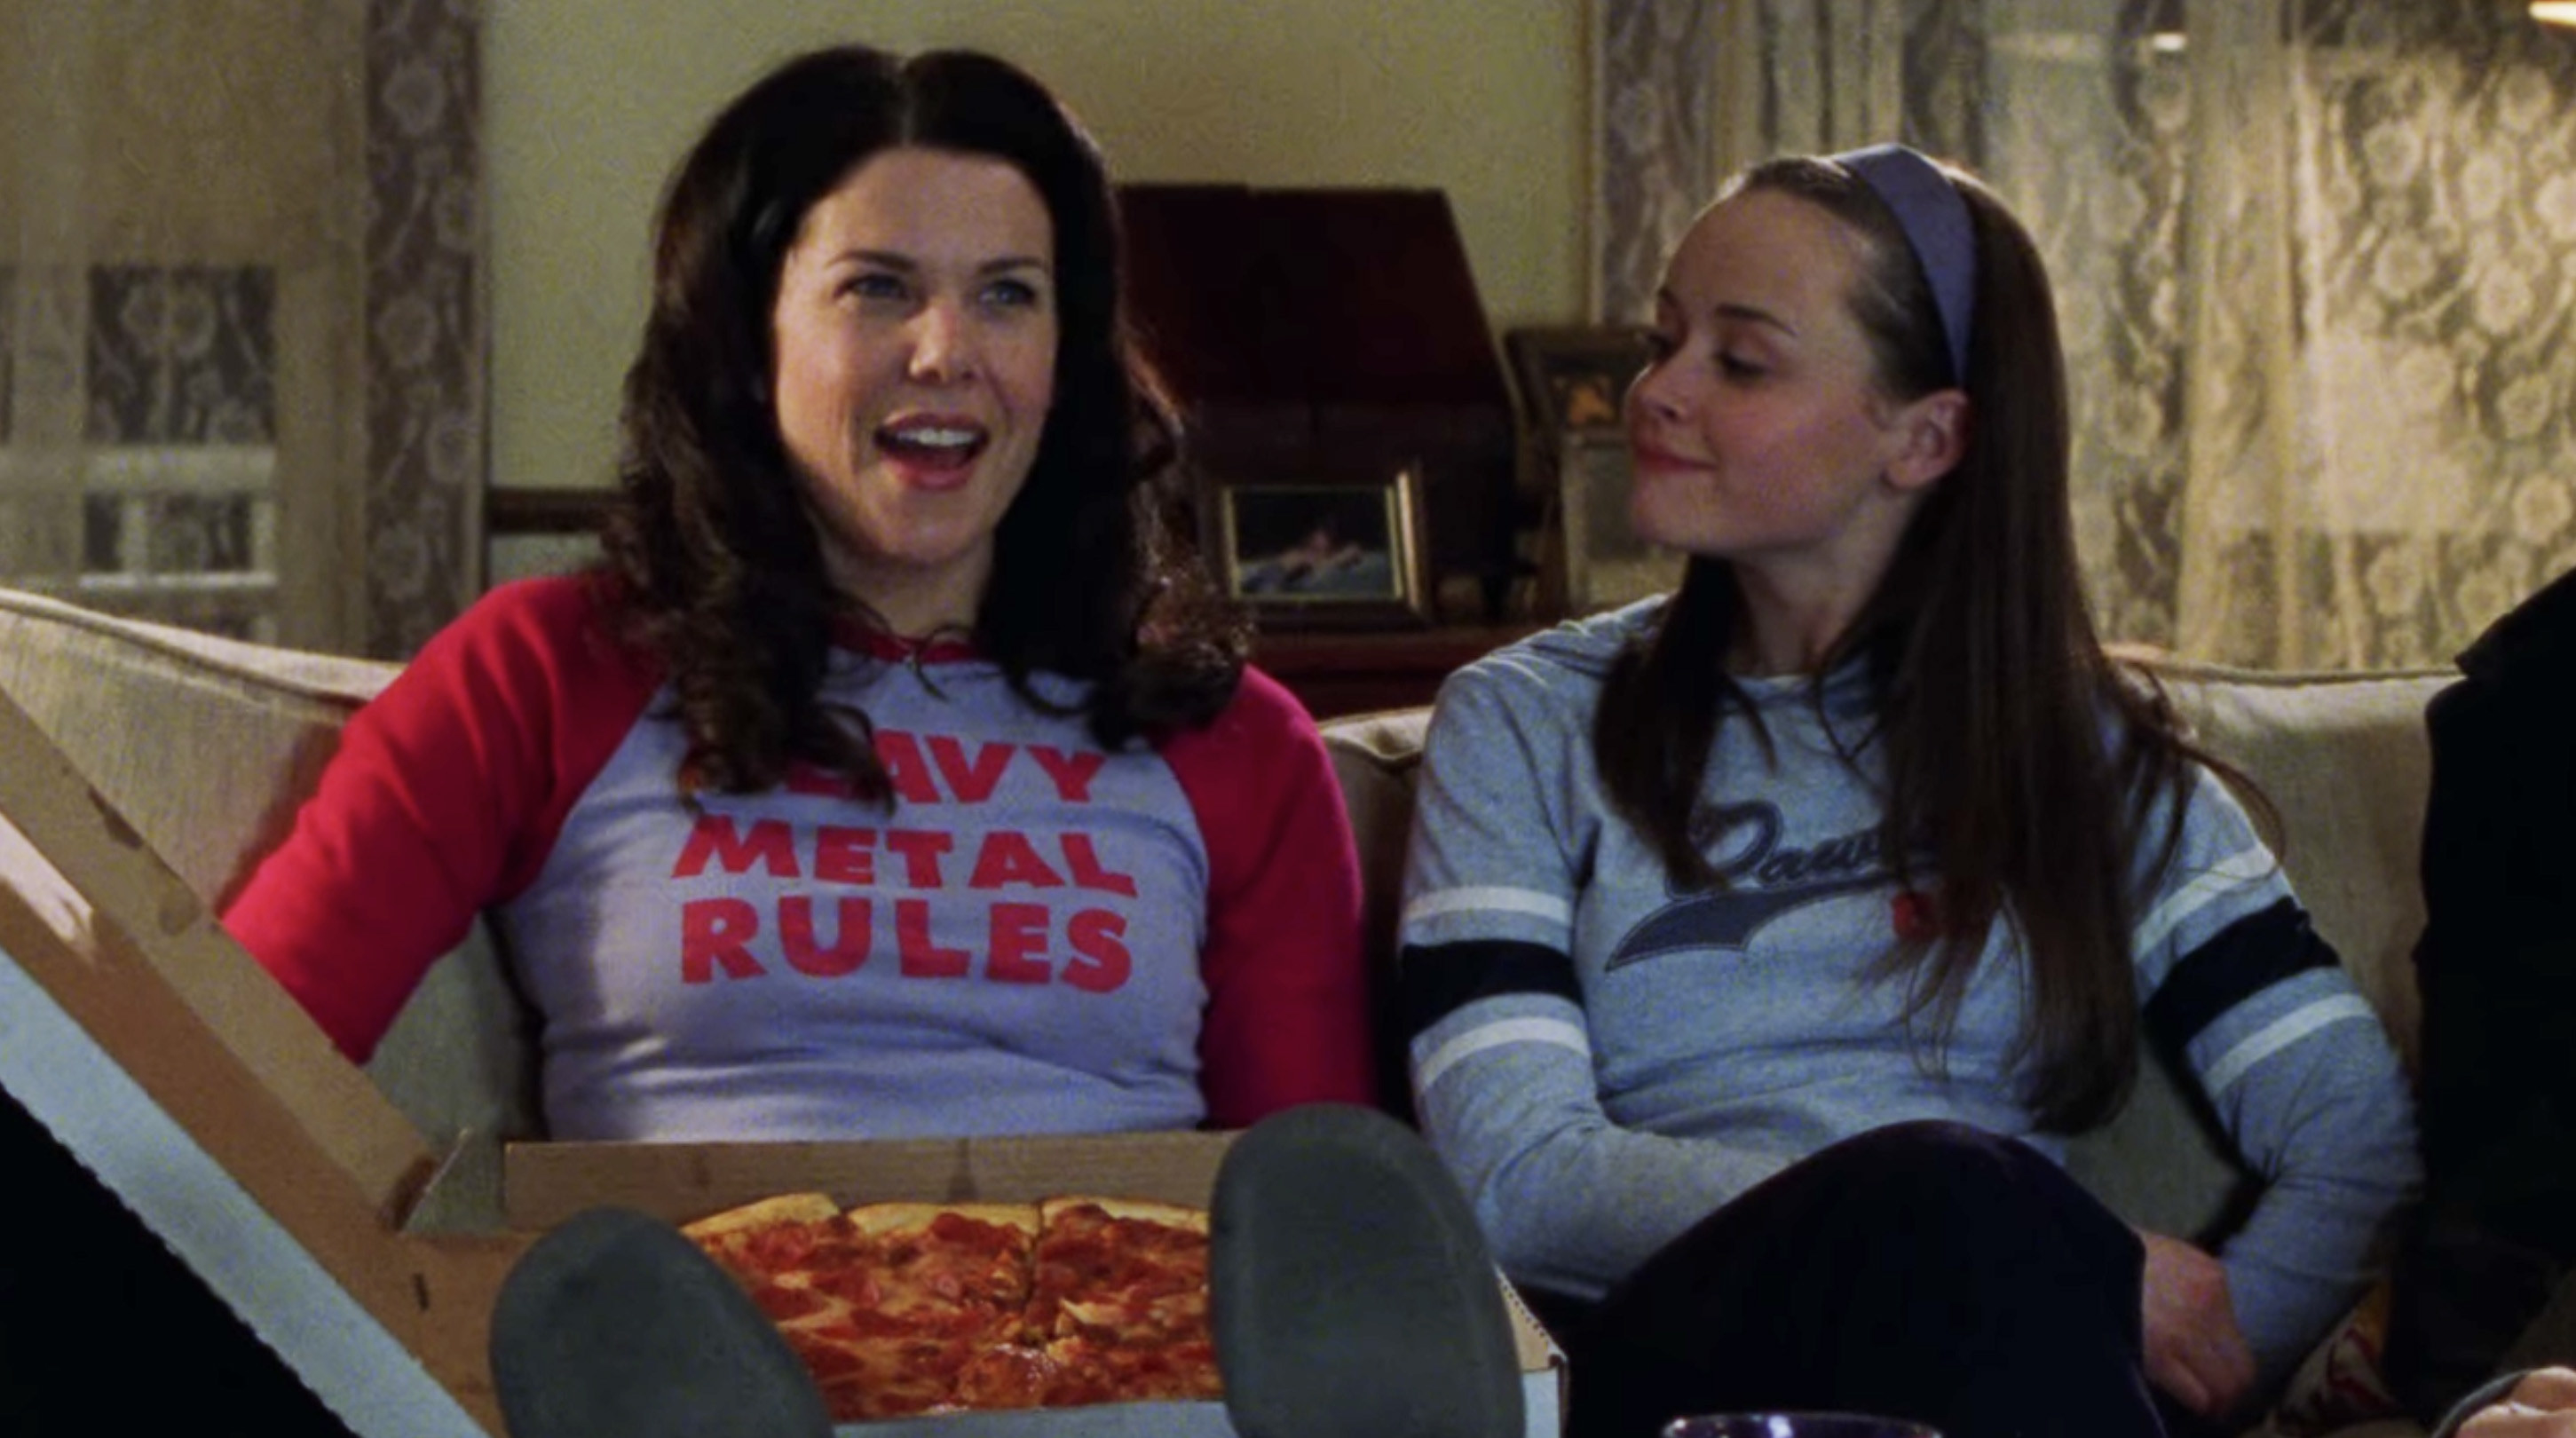 Lorelai and Rory sitting on the coach eating pizza